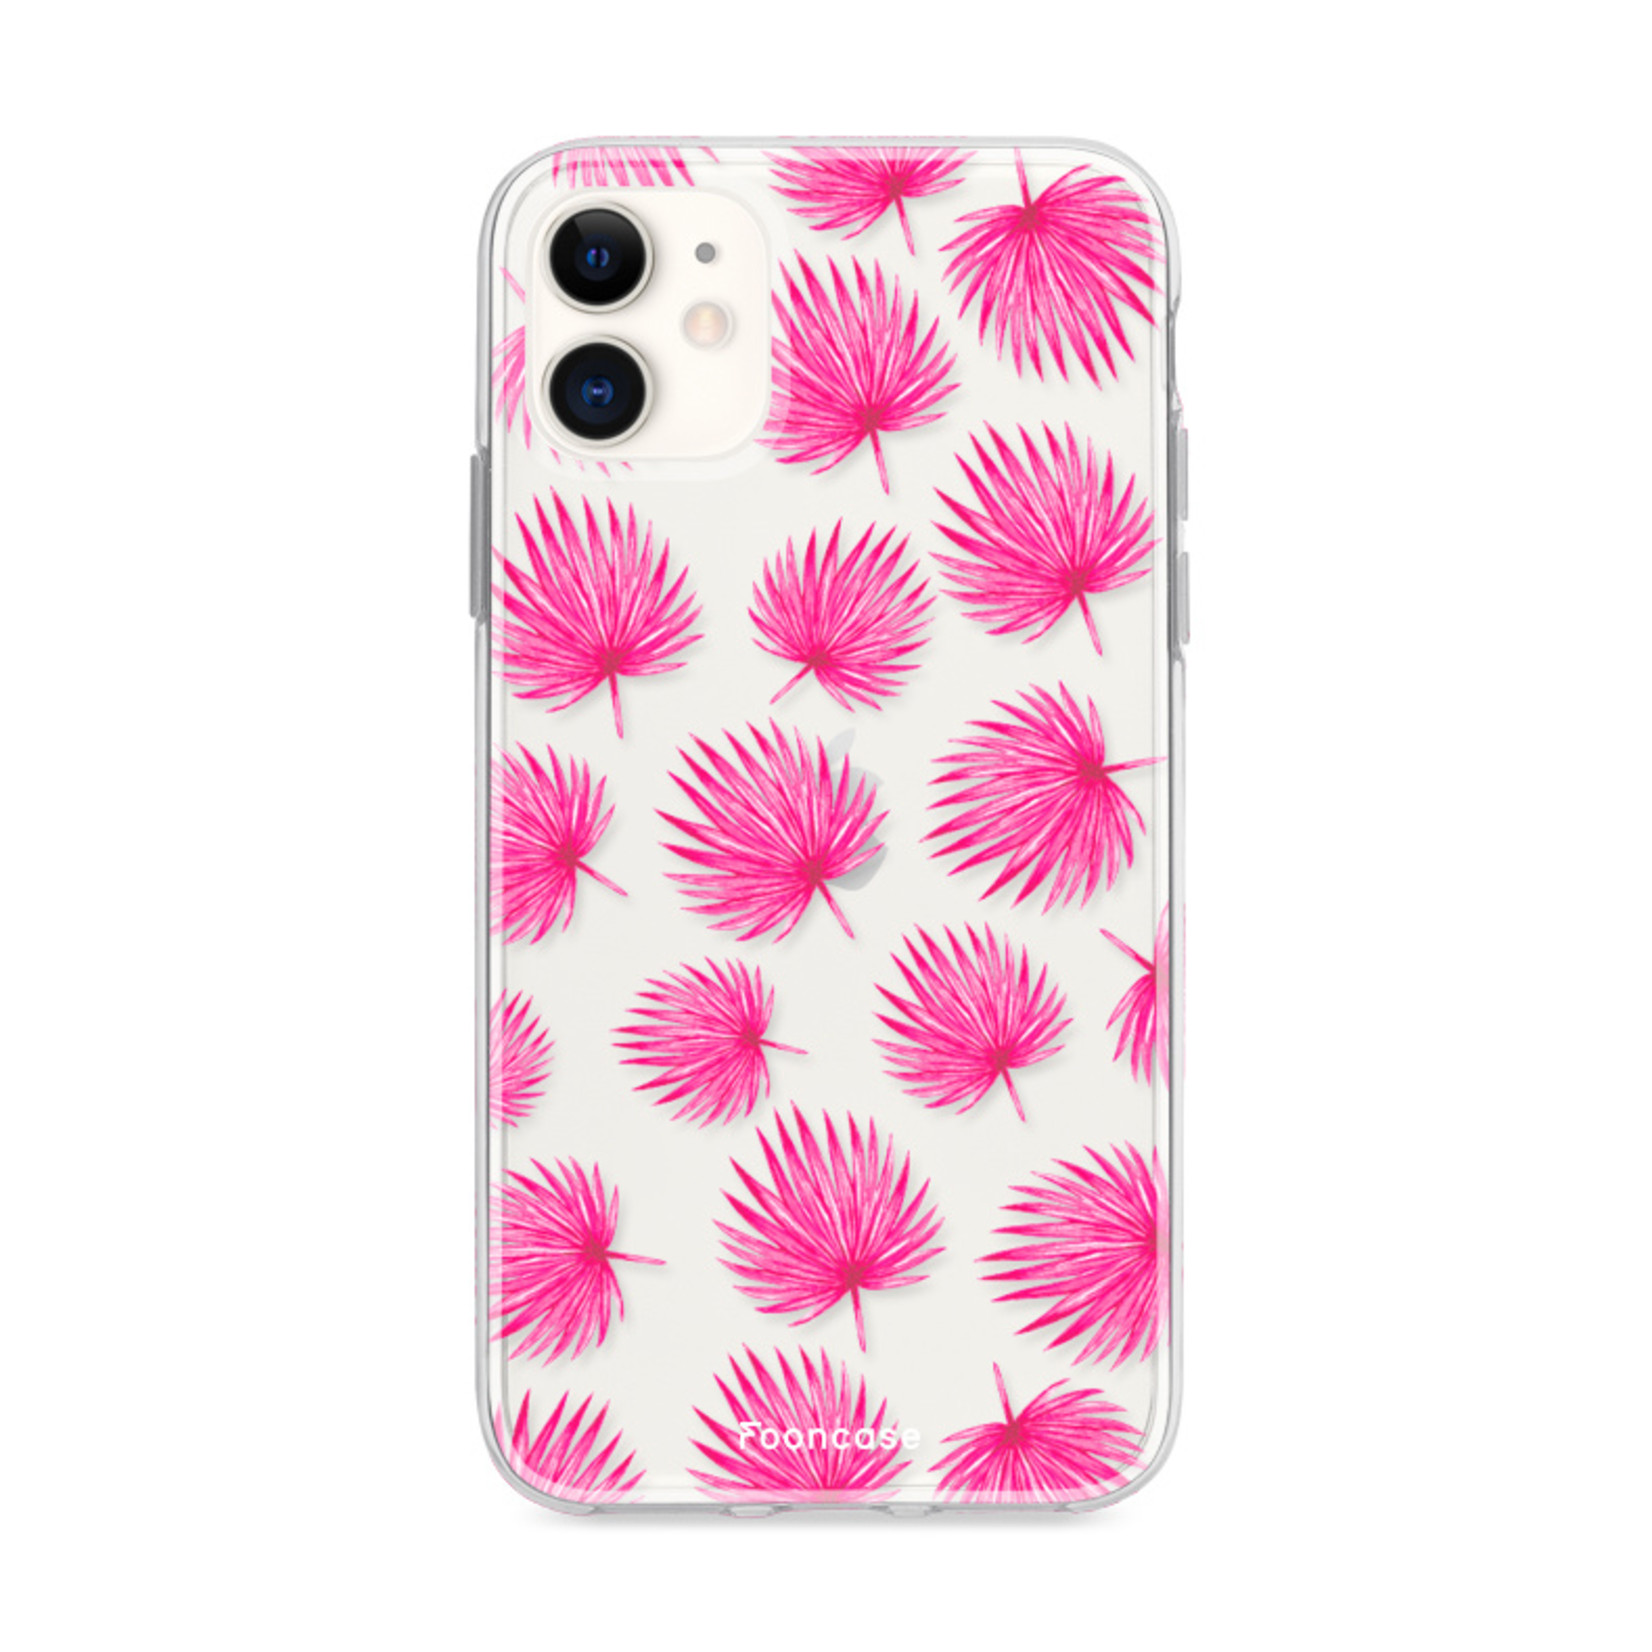 FOONCASE iPhone 12 Mini hoesje TPU Soft Case - Back Cover - Pink leaves / Roze bladeren